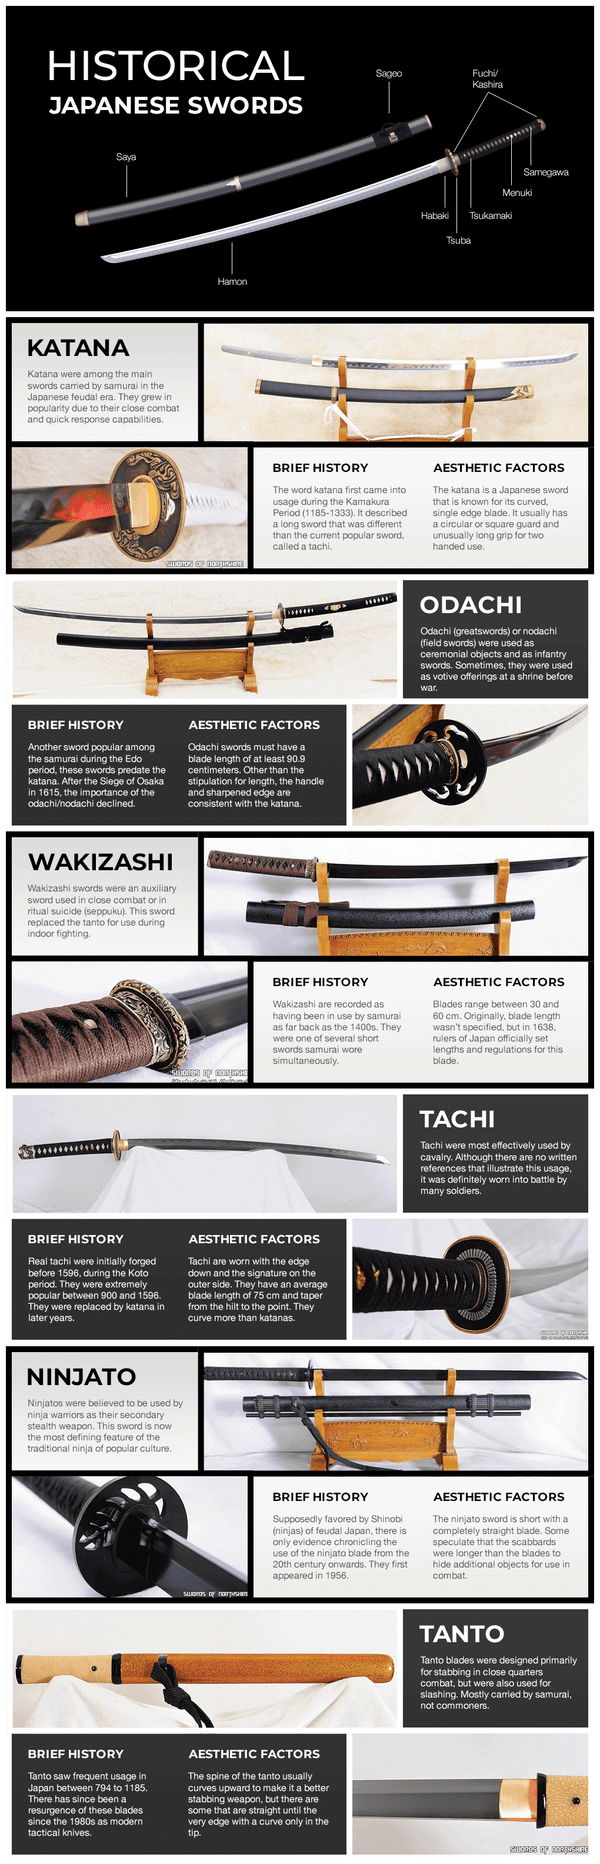 Historical Japanese Blades | Authentic Swords Made to Order